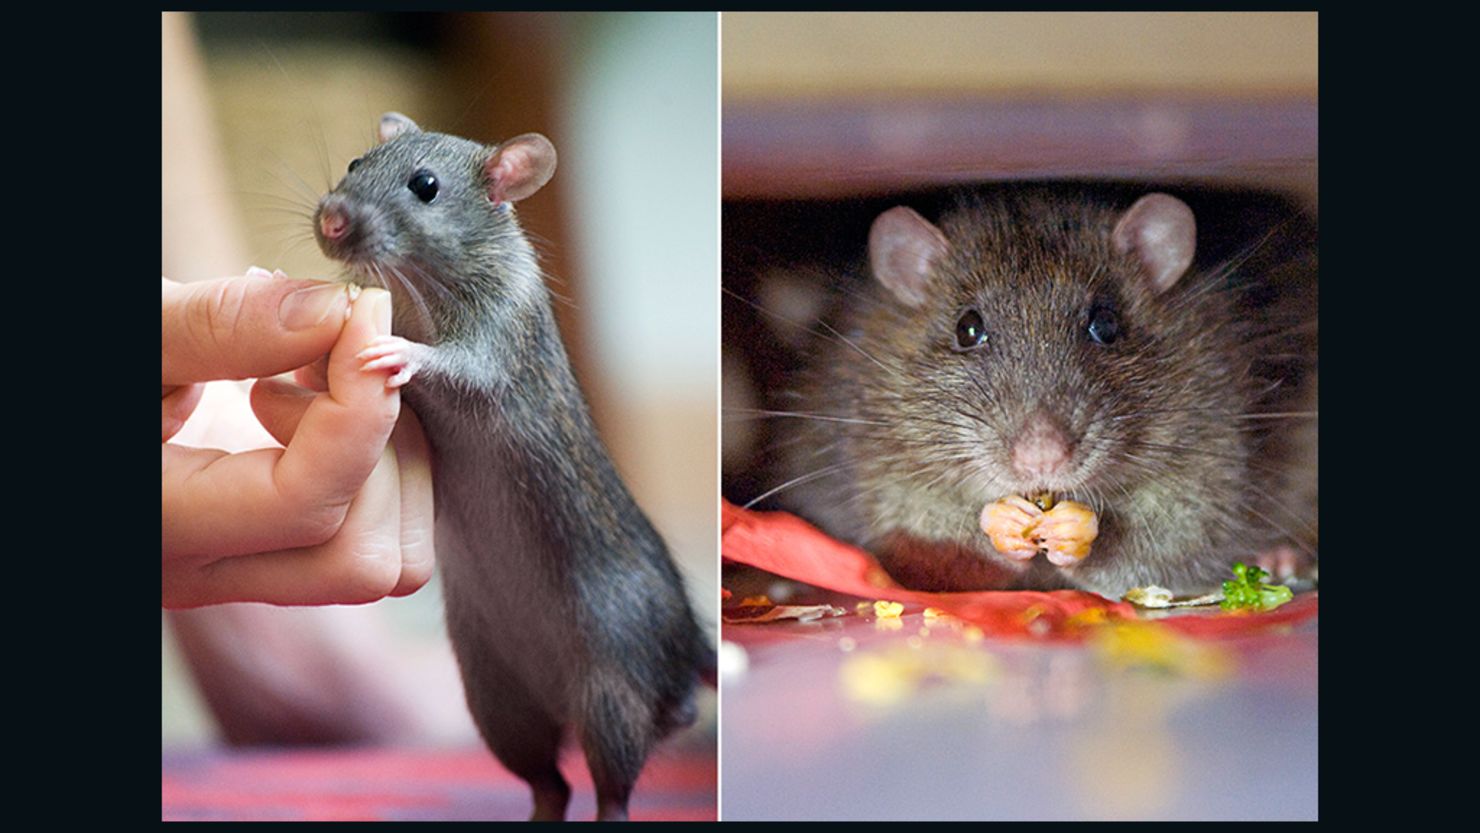 How a Hong Kong alley rat changed a young couple's life